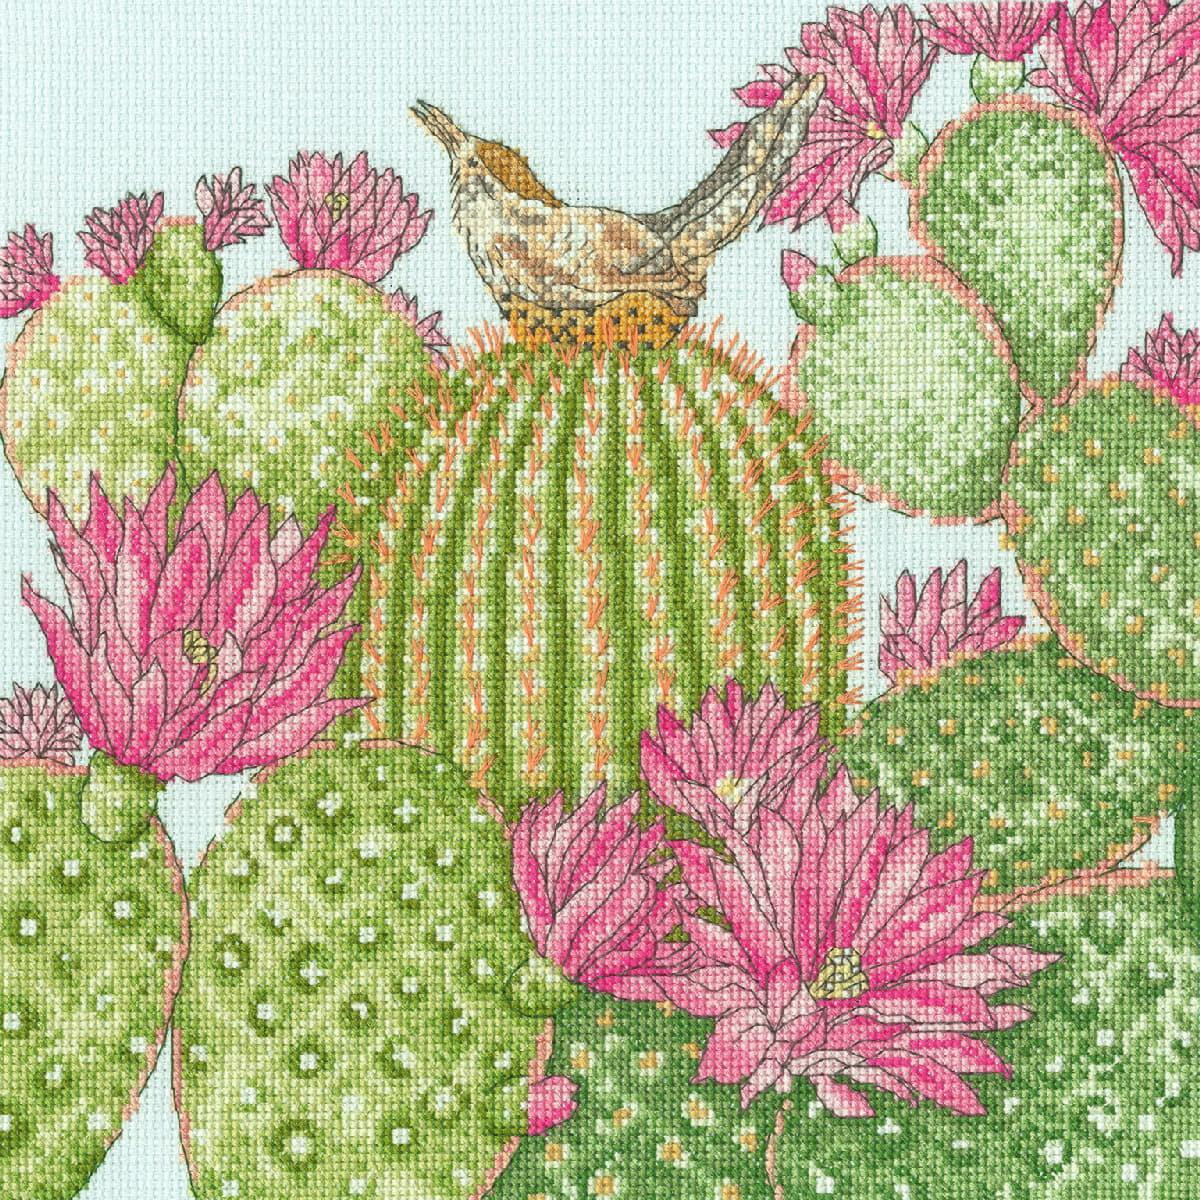 A vibrant cross stitch design features a bird perched on...